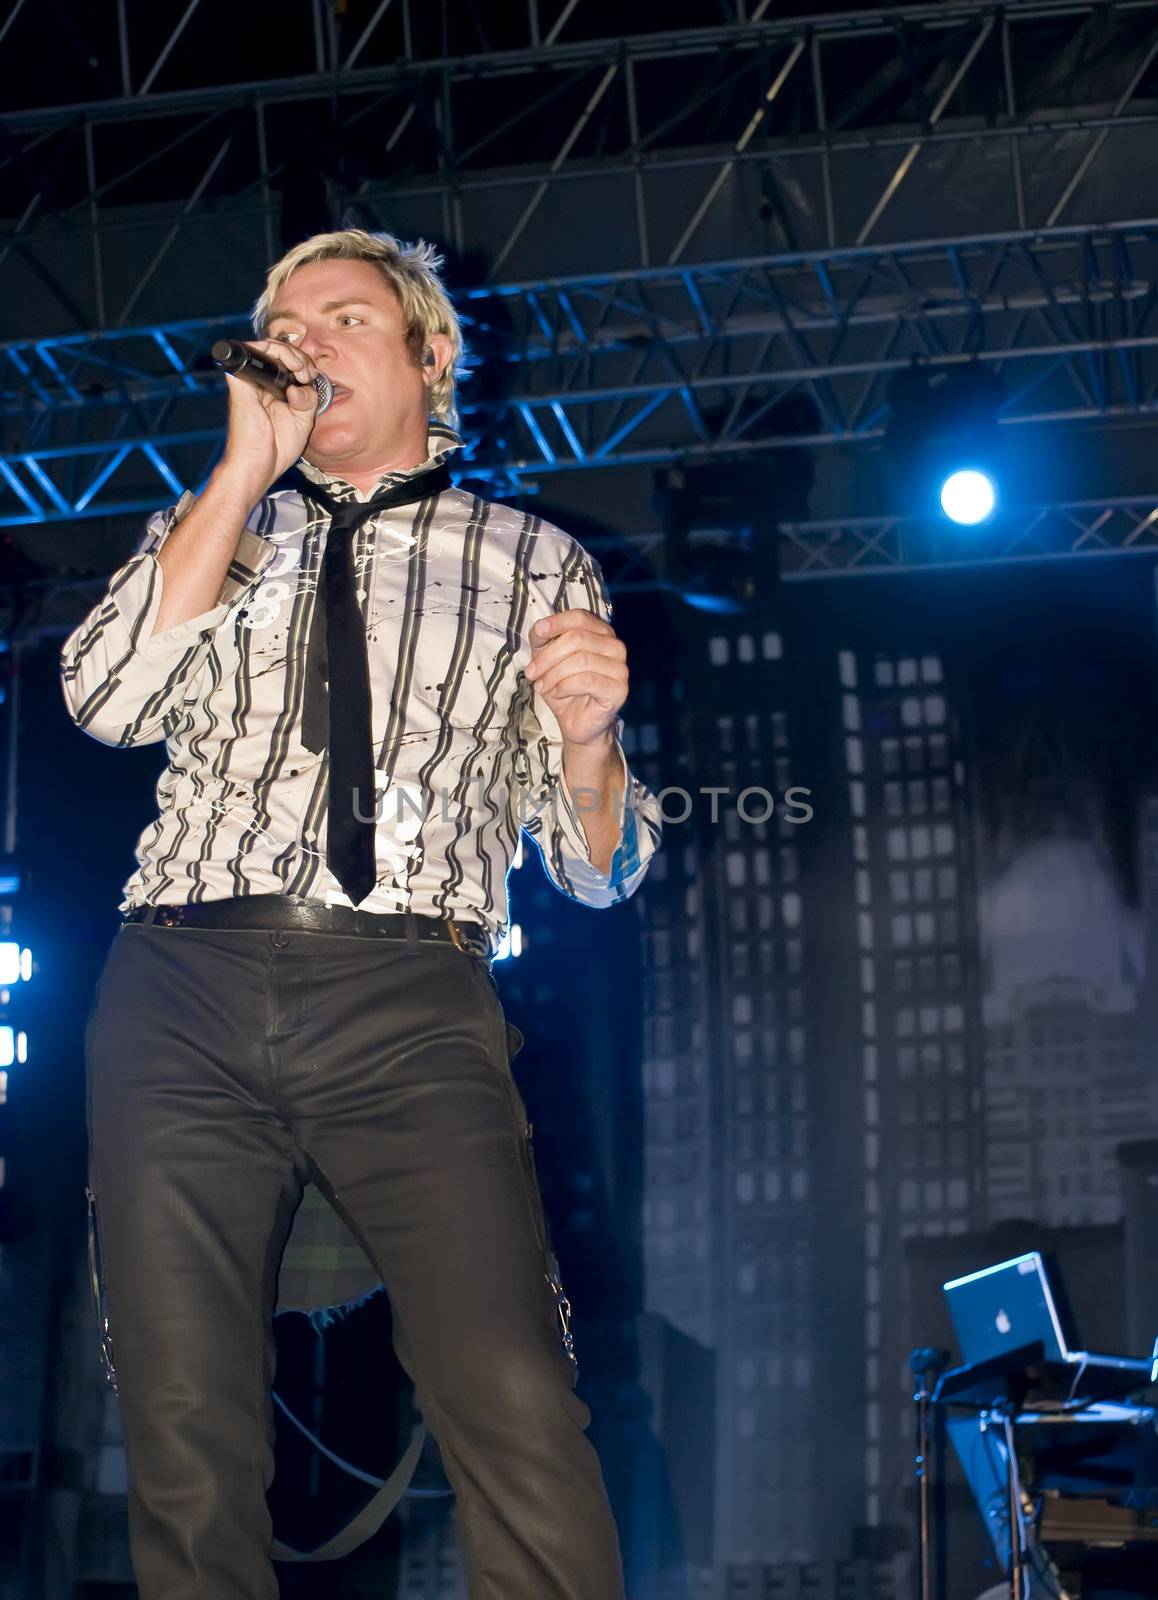 Duran Duran frontman and vocalist Simon Le Bon live on stage in Malta on 26th July 2008 during Red Carpet Massacre Tour